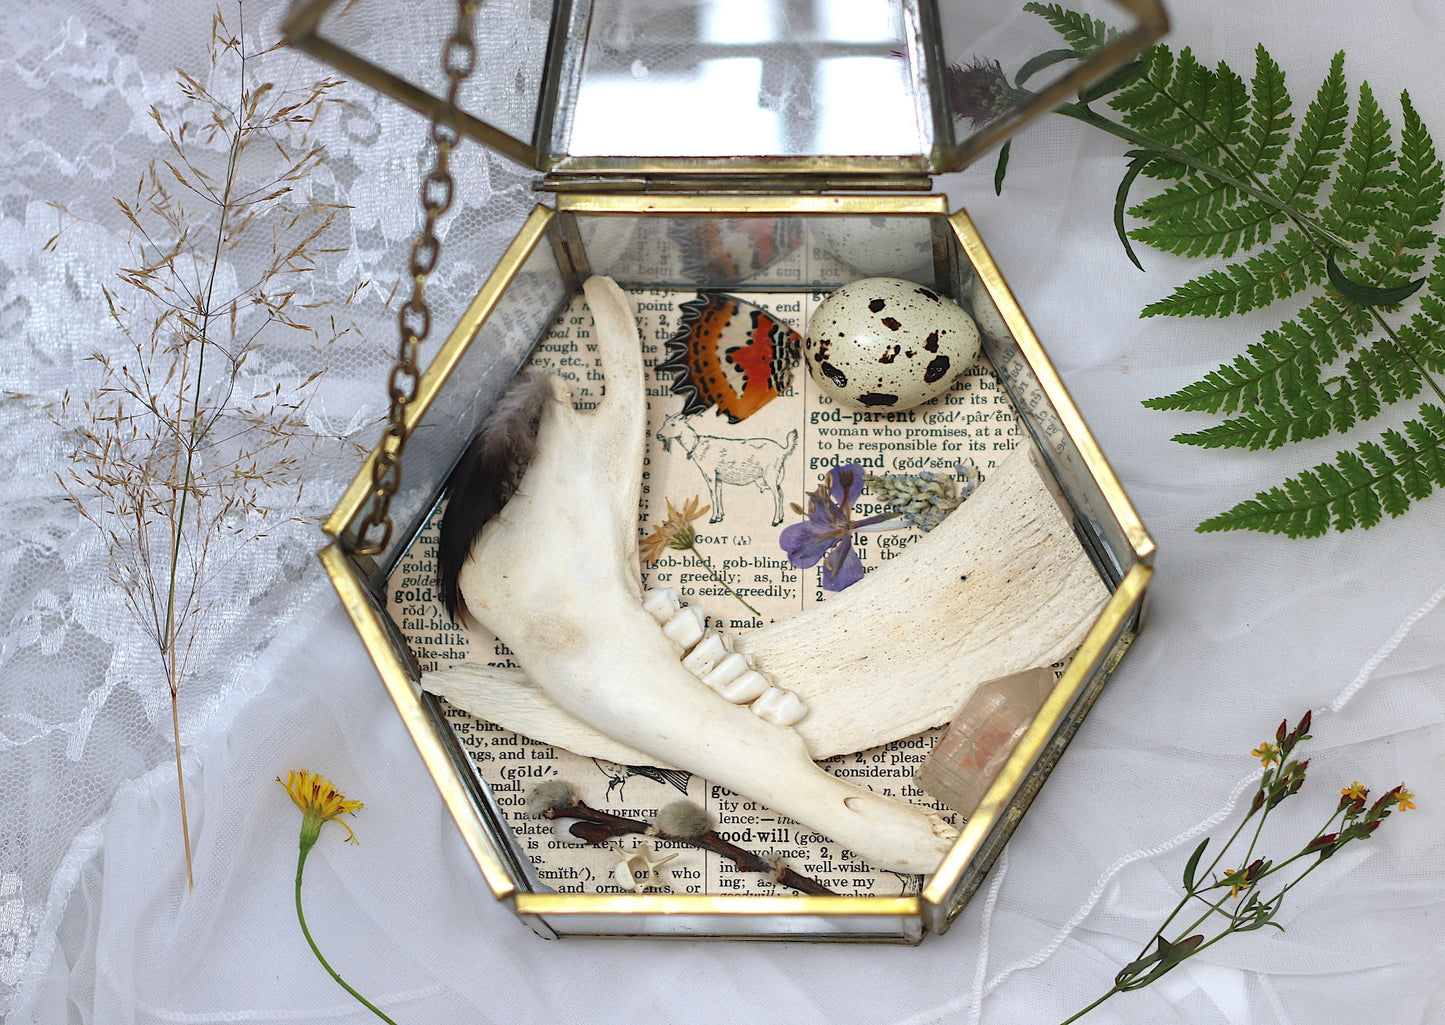 Goat Oddity Box | Goblincore Taxidermy Real Animal Bone Display | Gothic and Witch Art Home Decor | Oddities and Curiosities Wunderkammer